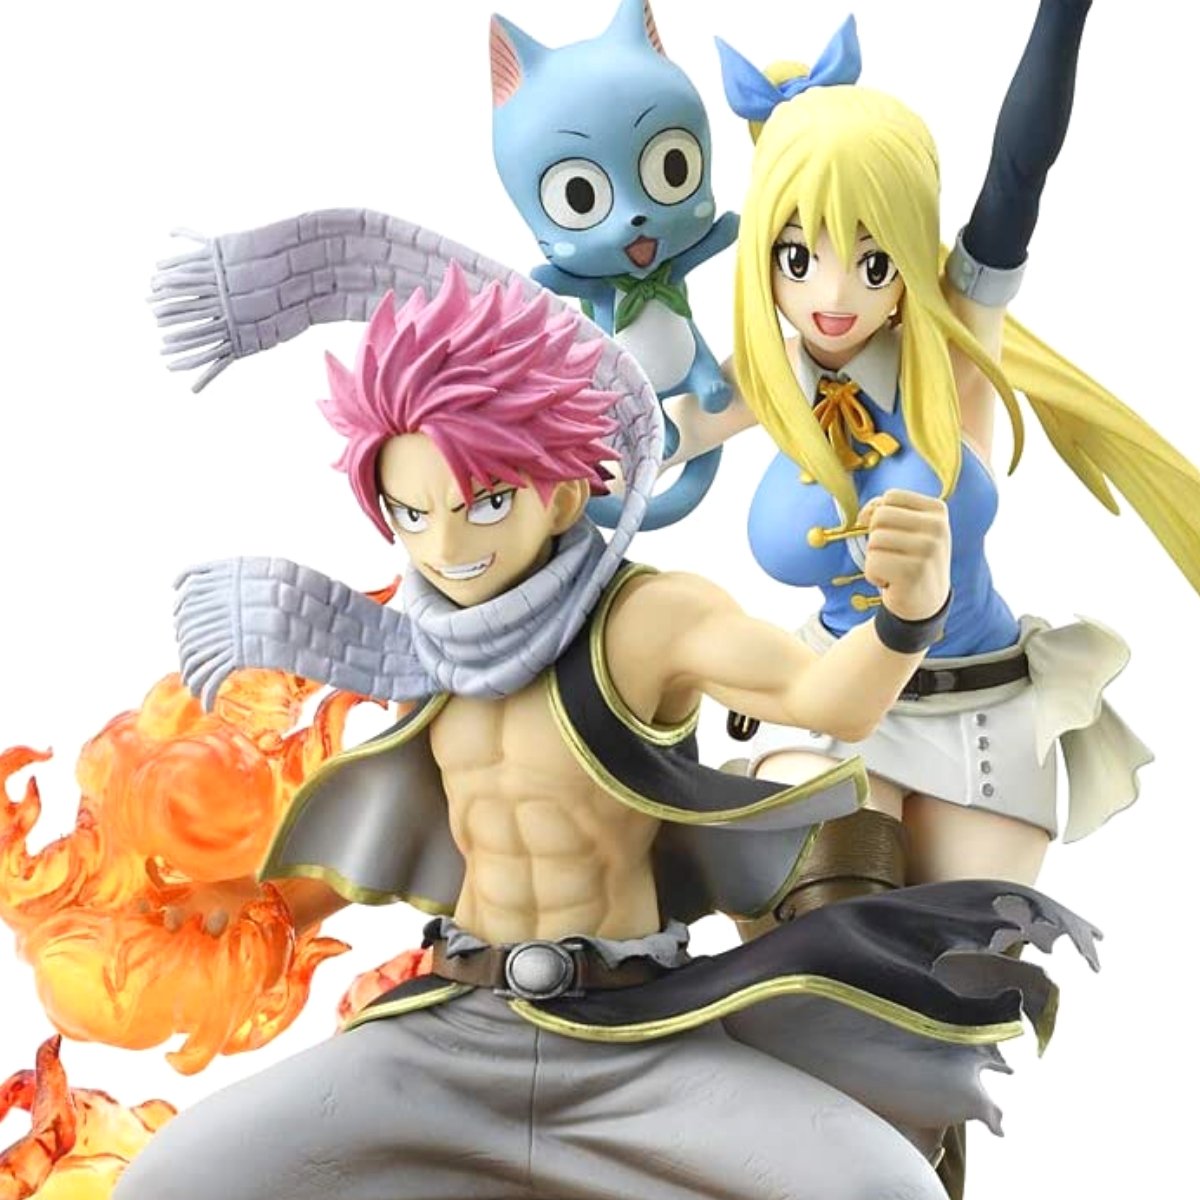 FAIRY TAIL figures and goods